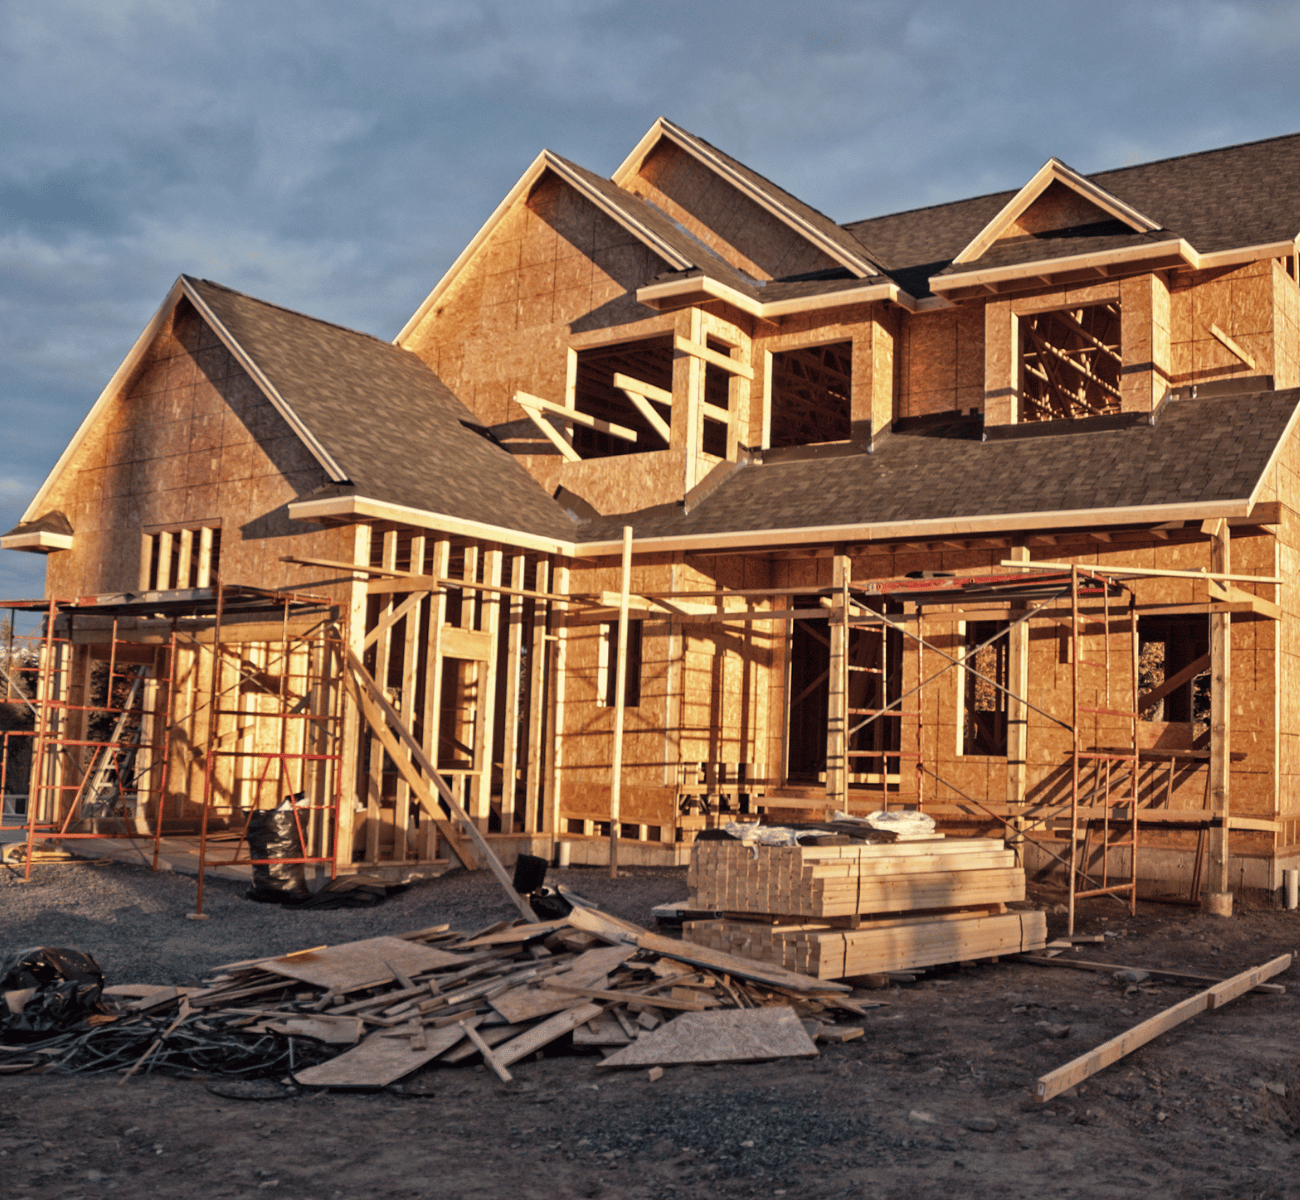 Buying New Construction: Is it Better to Build or Purchase a Spec Home?